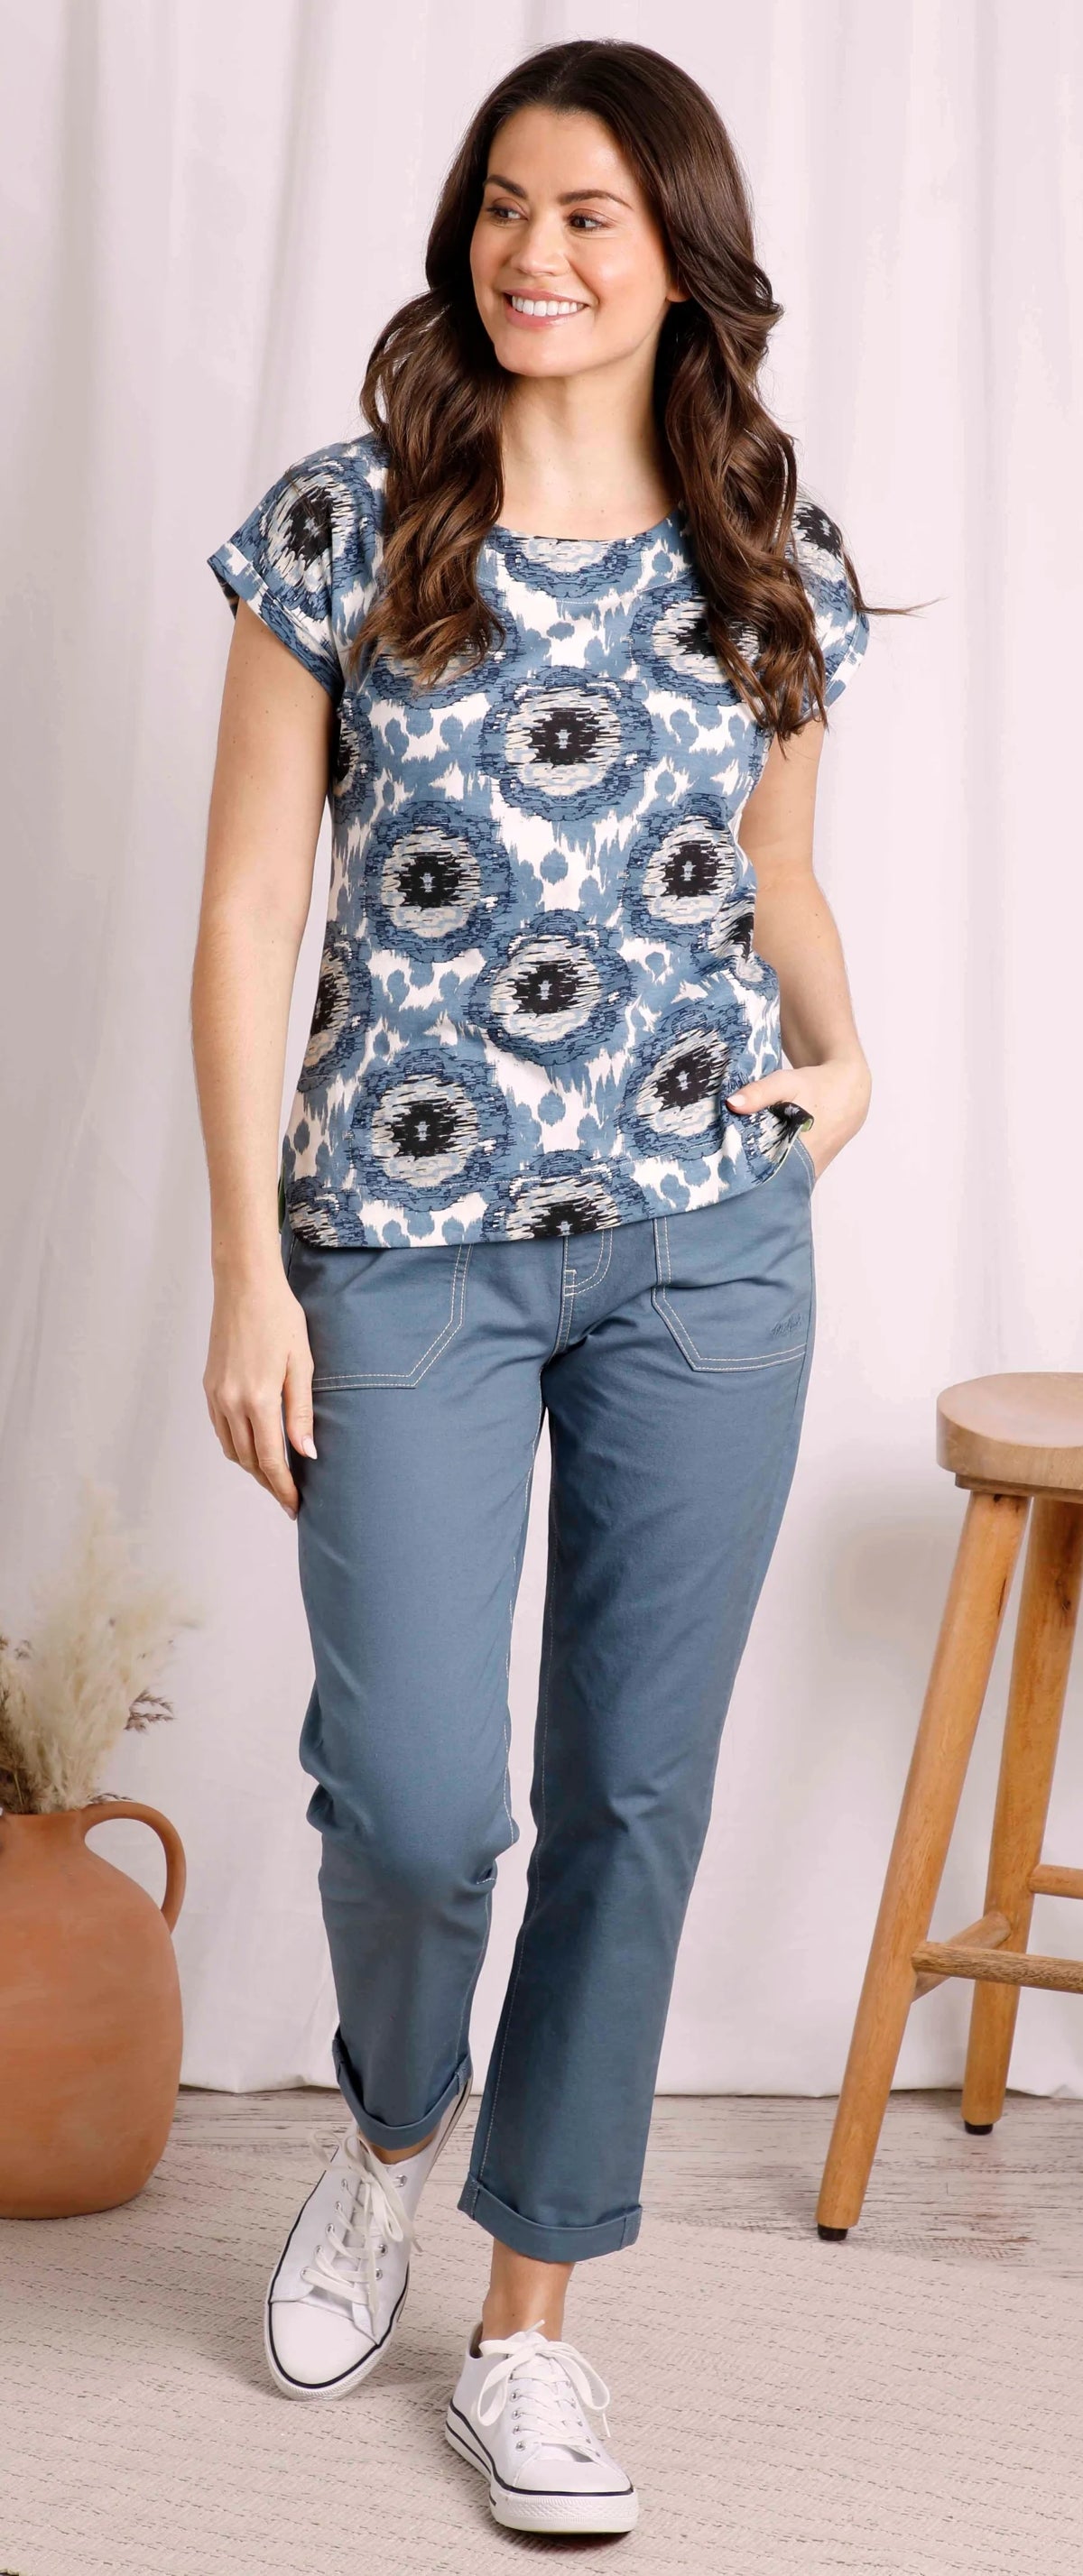 Paw Paw women's short sleeve tee in Pale Denim with a circular print from Weird Fish.